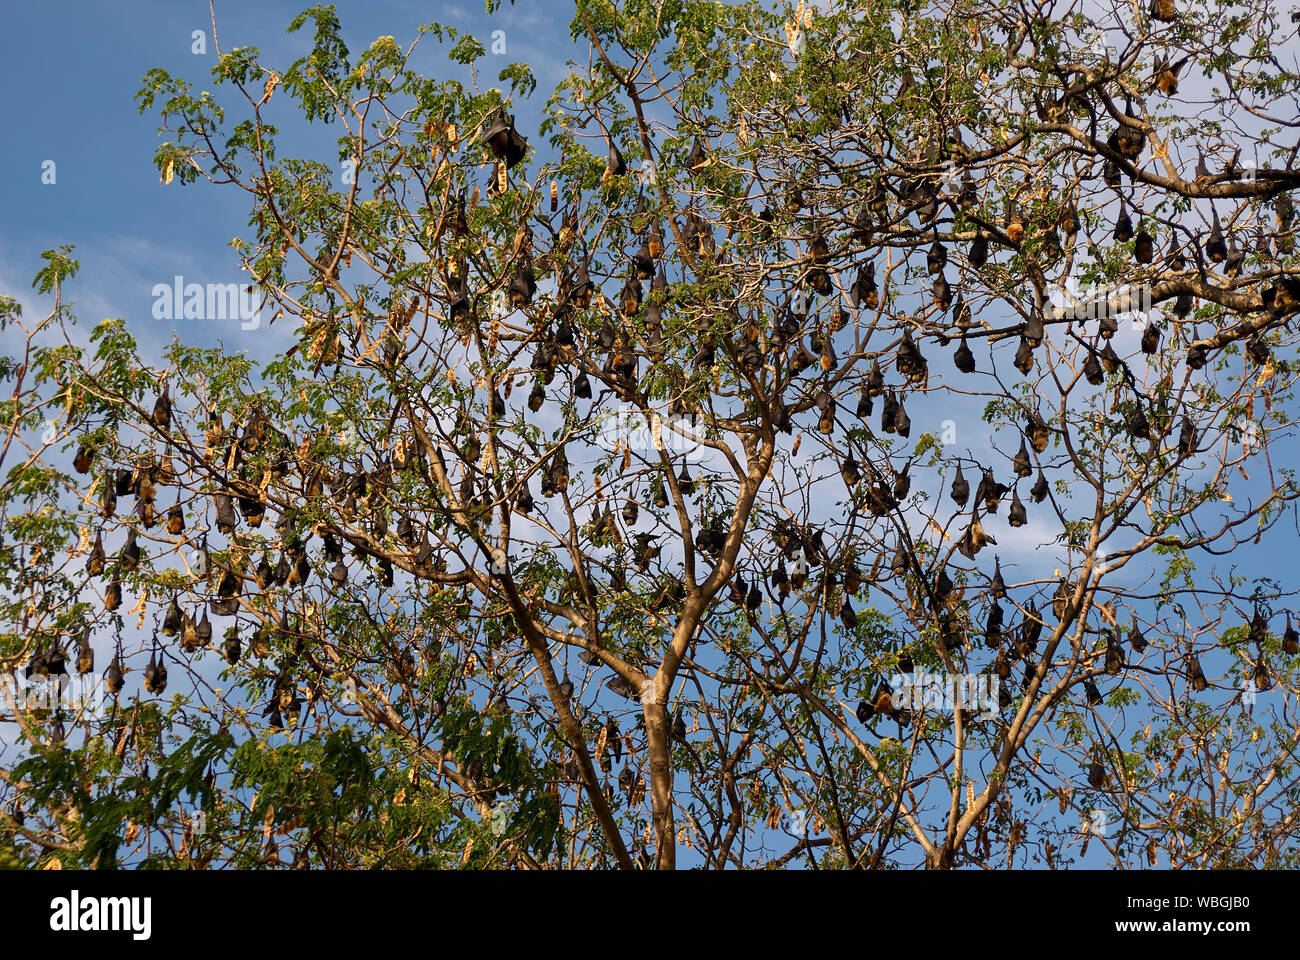 Flying Foxes, also called Fruit Bats, in one of their sleeping trees on Chole island Stock Photo